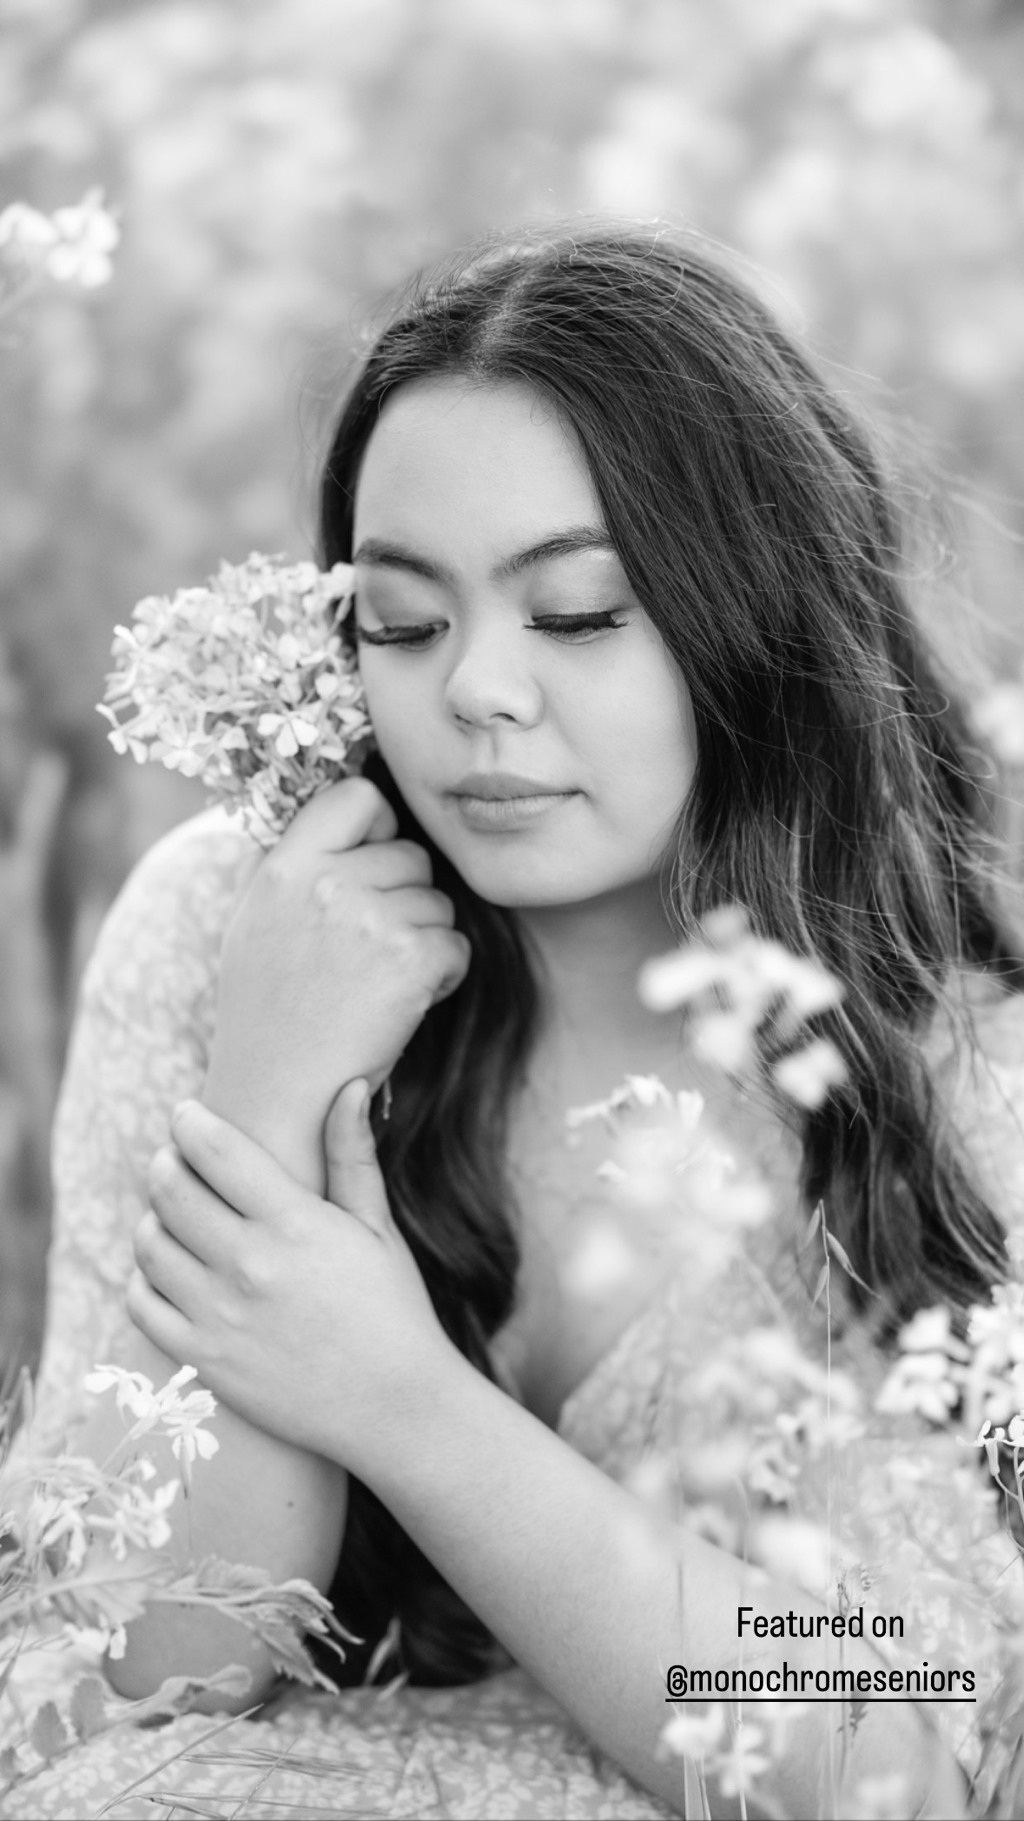 teenage girl with long dark hair holding flowers by face with eyes closed